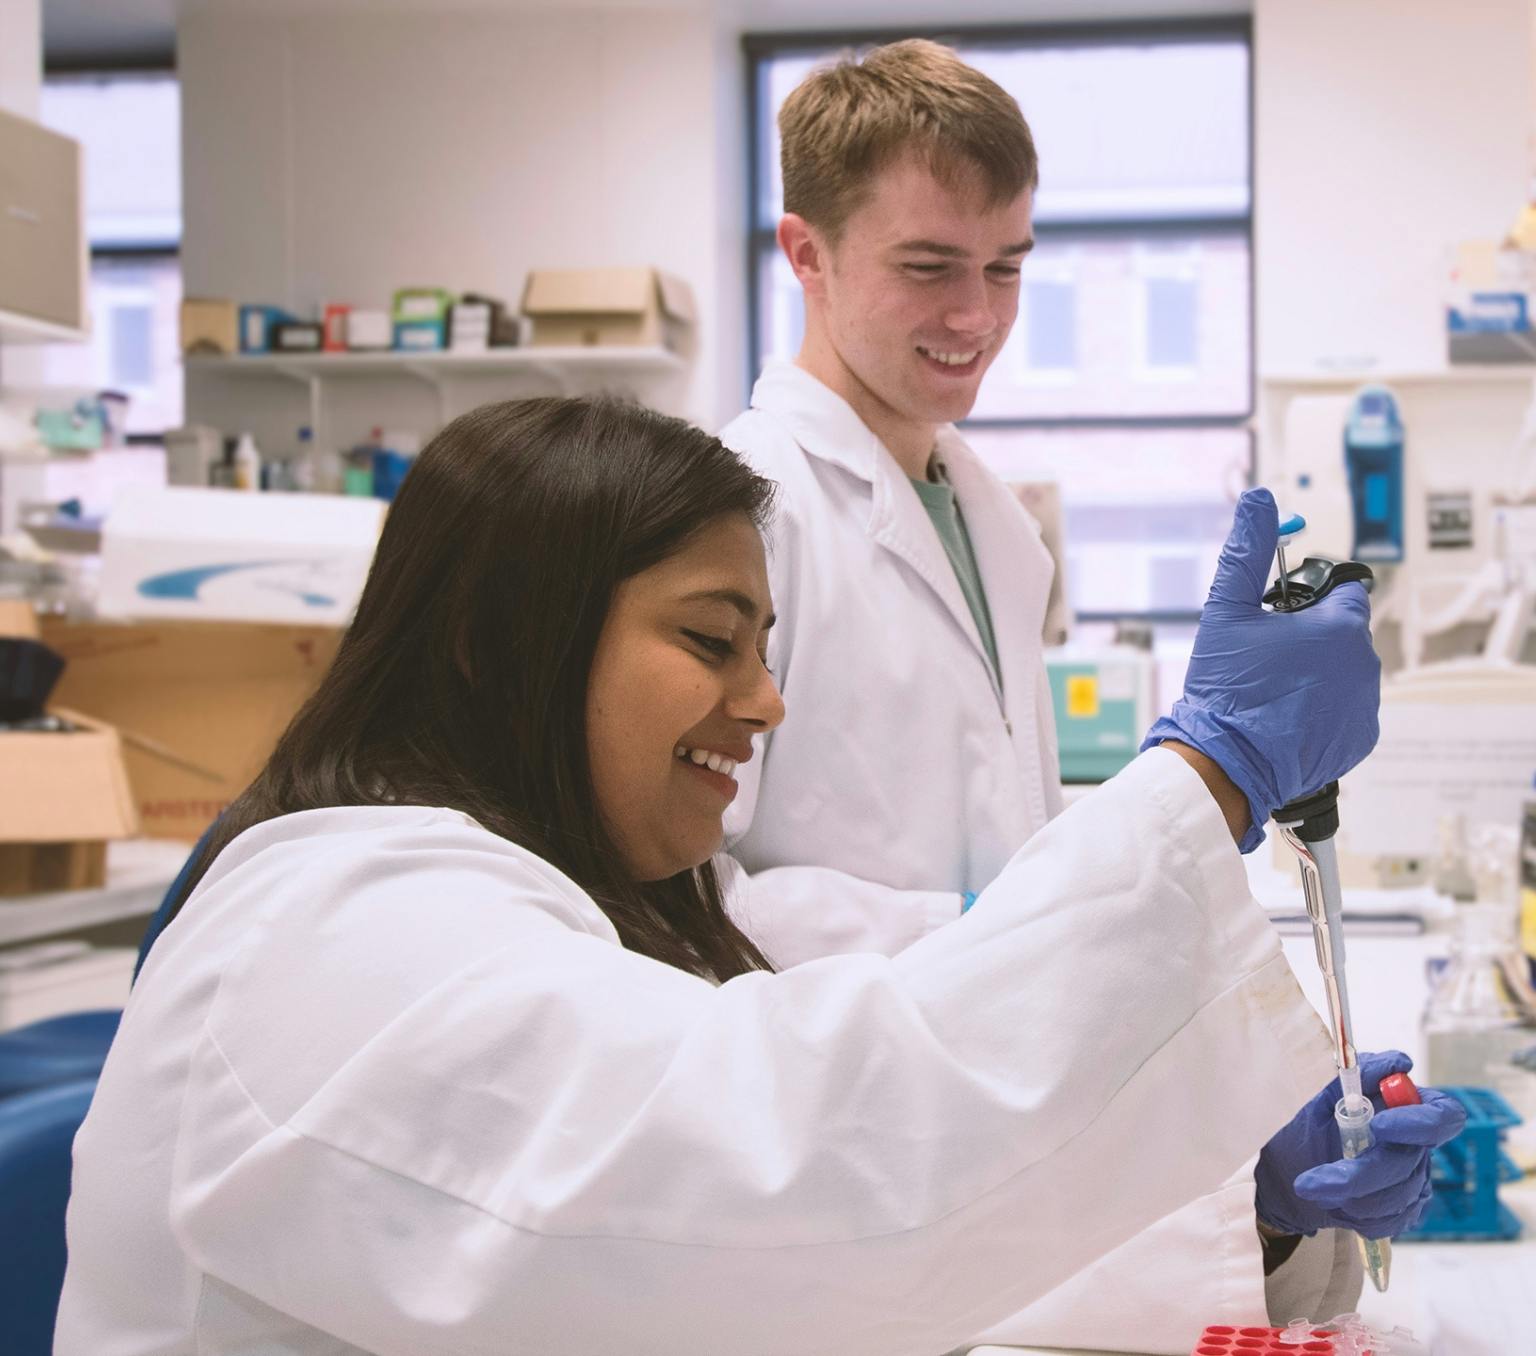 Dr Anukriti Mathur and Callum Kay in a science lab. They are both wearing white lab coats. Dr Mathur is injecting an unknown substance into a test tube.